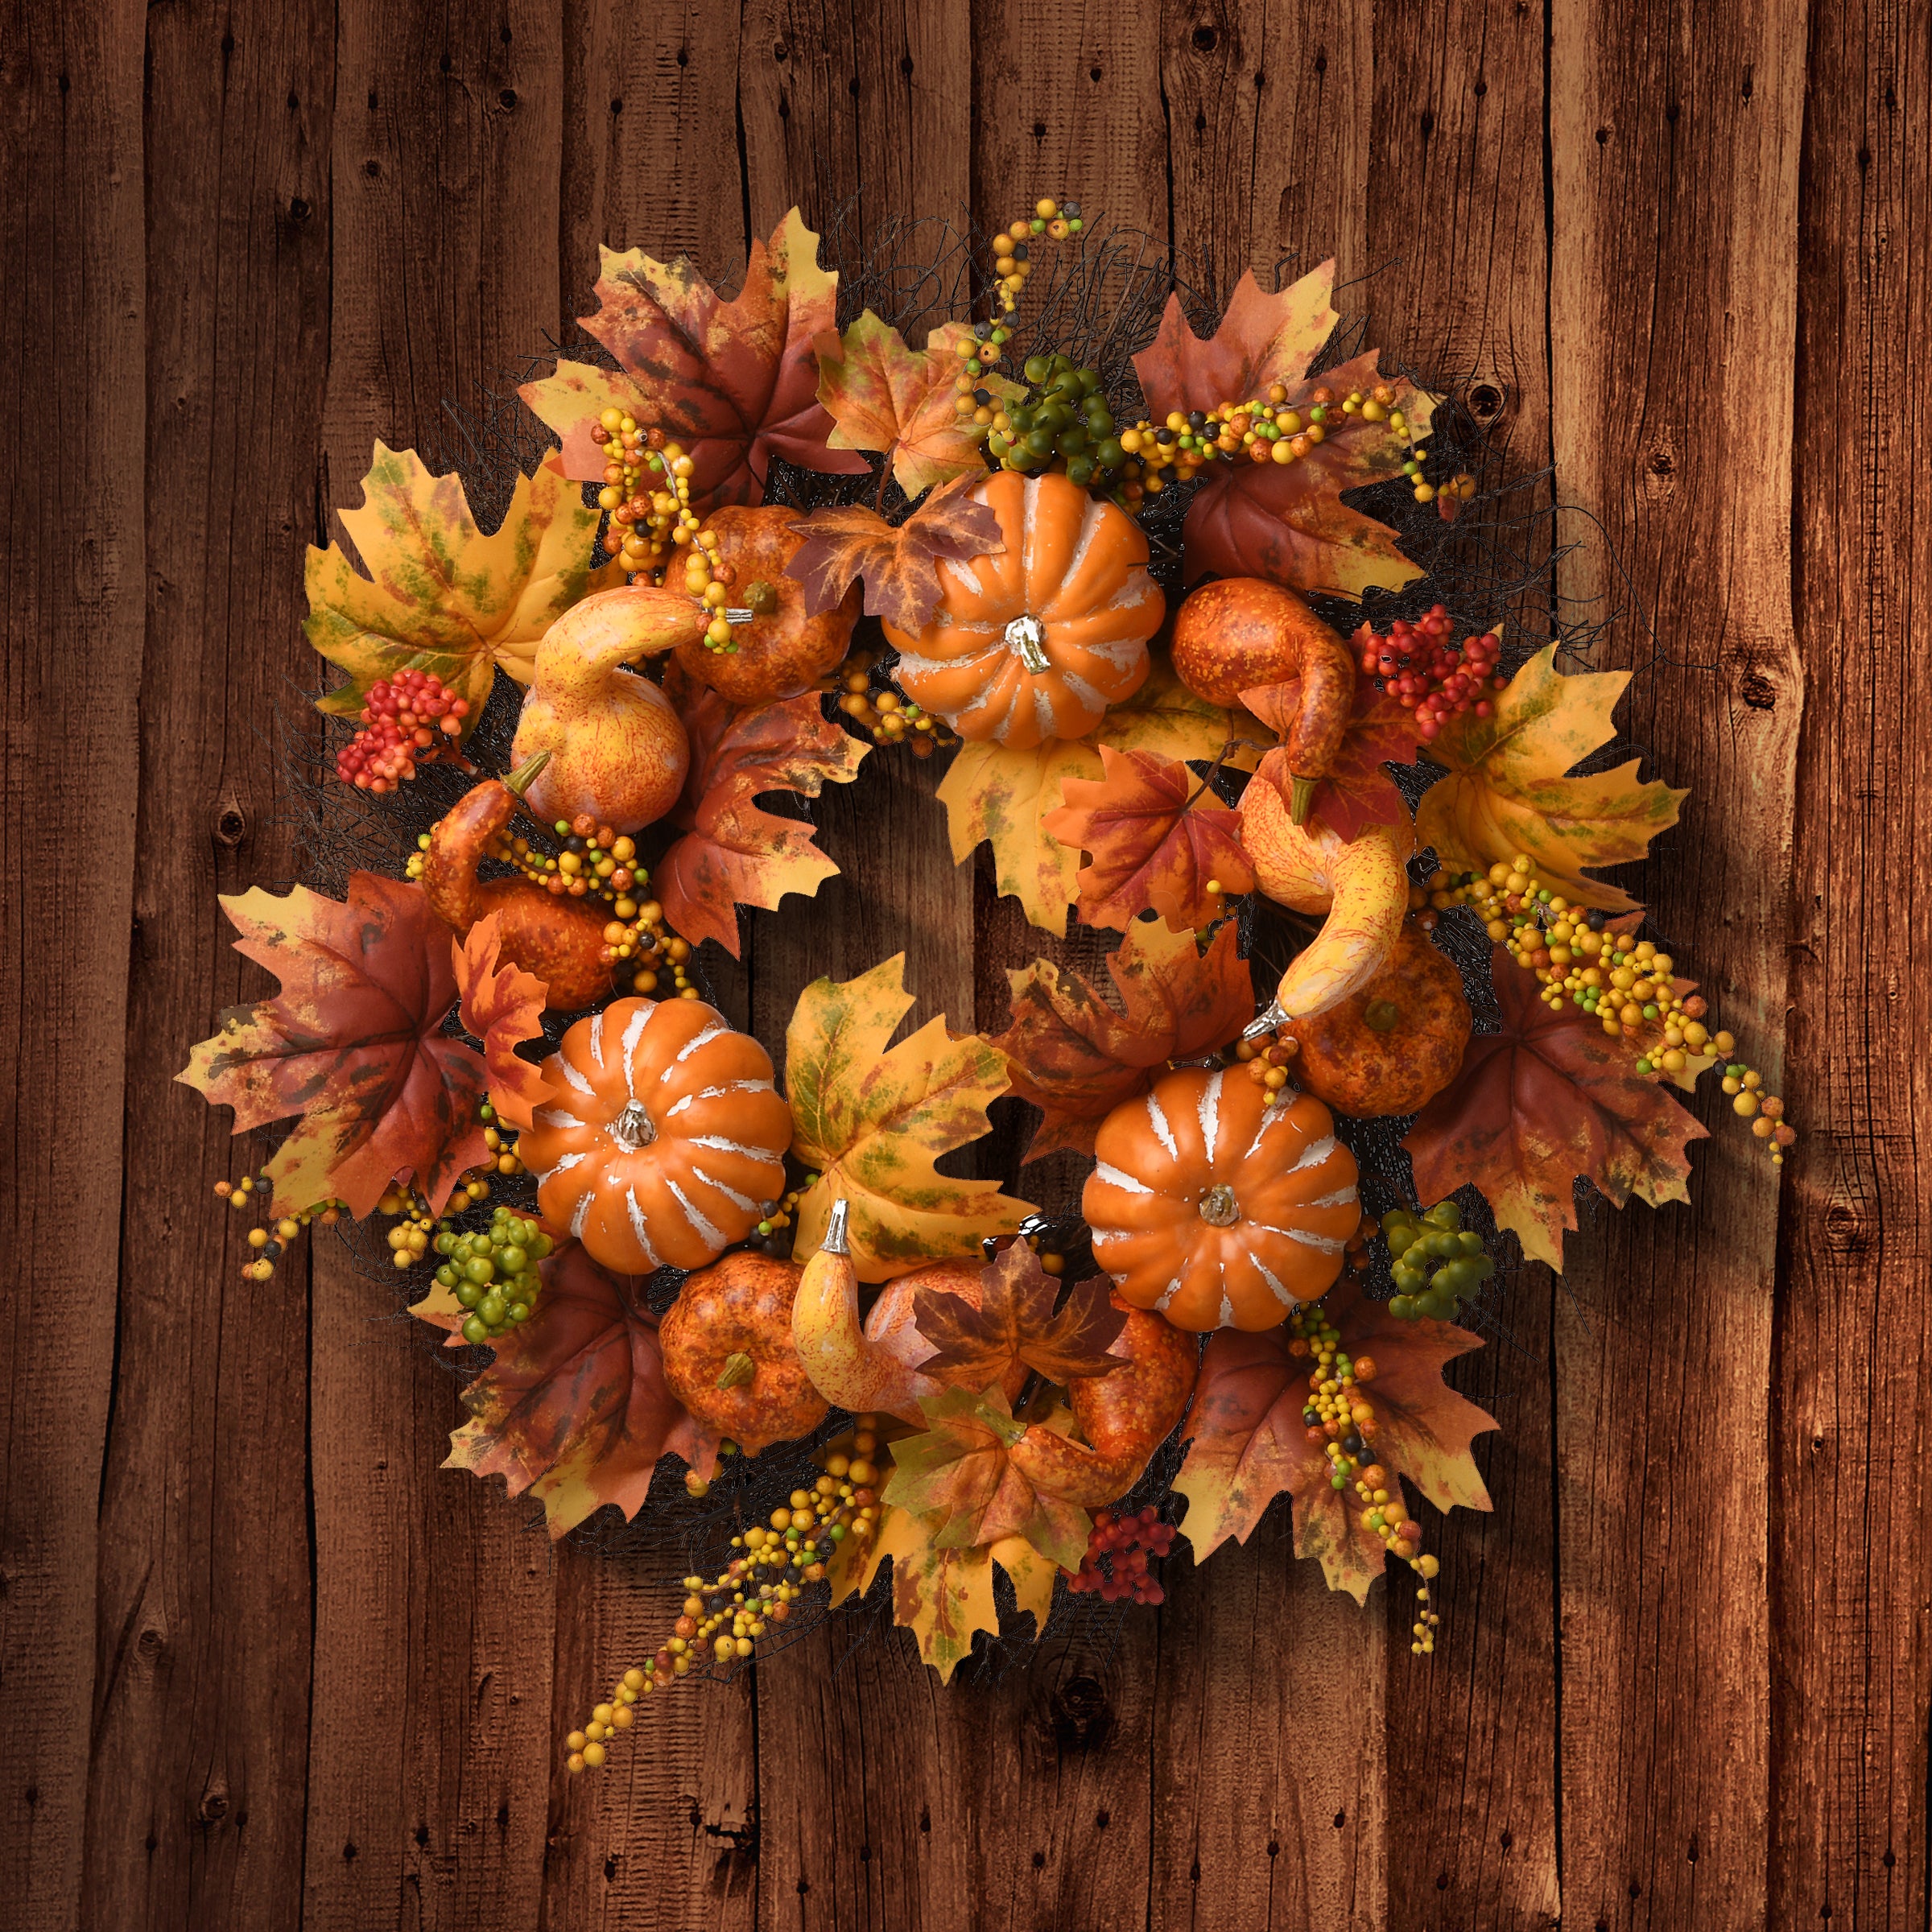 National Tree Company Artificial Autumn Wreath, Decorated with Pumpkins, Gourds, Berry Clusters, Maple Leaves, Autumn Collection, 22 in